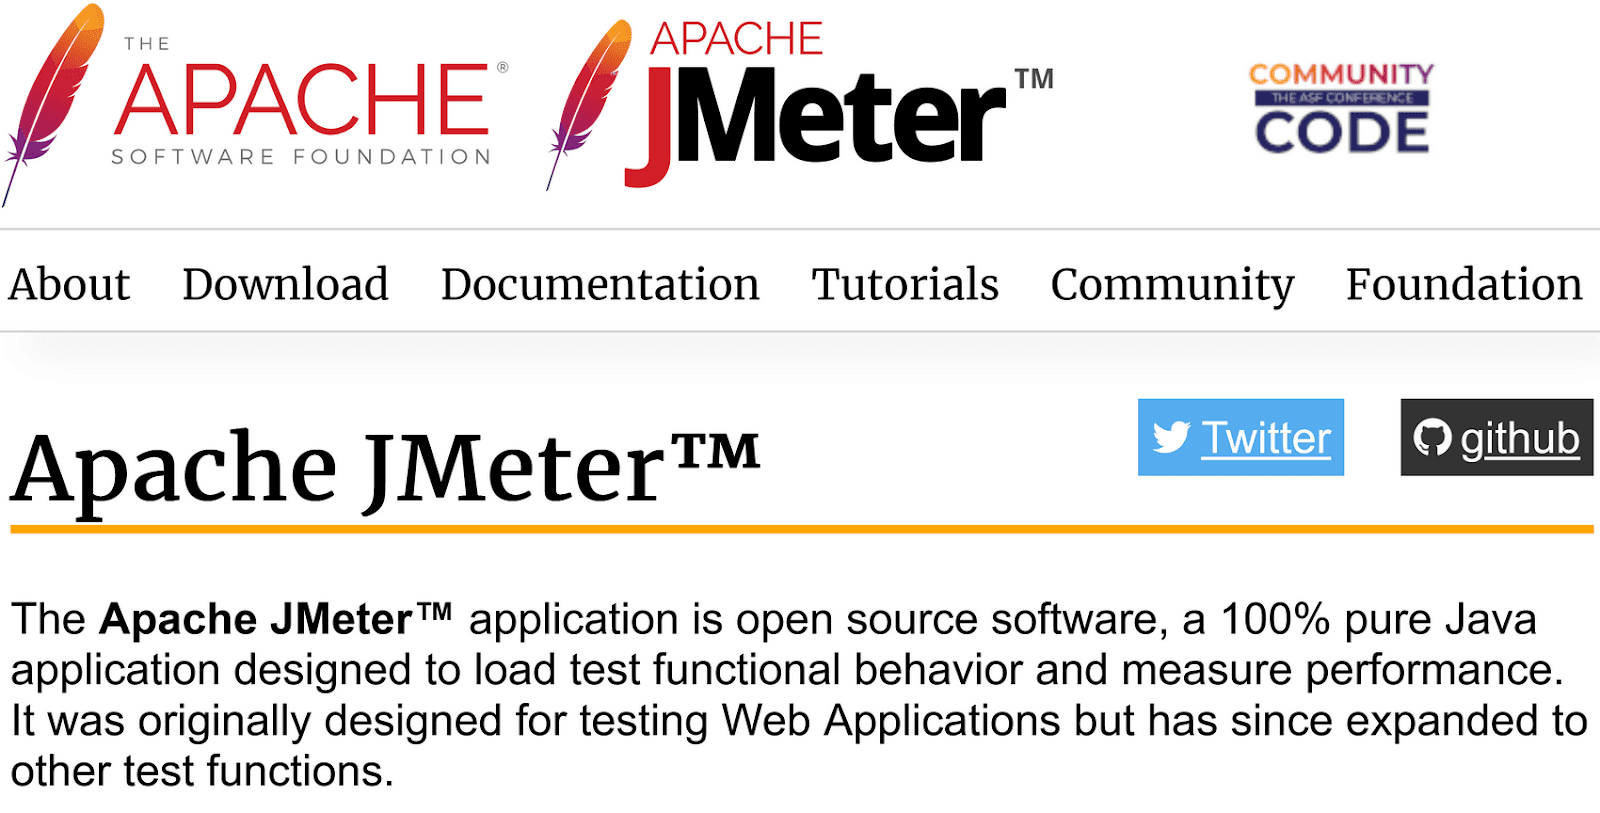 Apache JMeter homepage with a description of the software as an open-source tool for load testing and measuring performance.